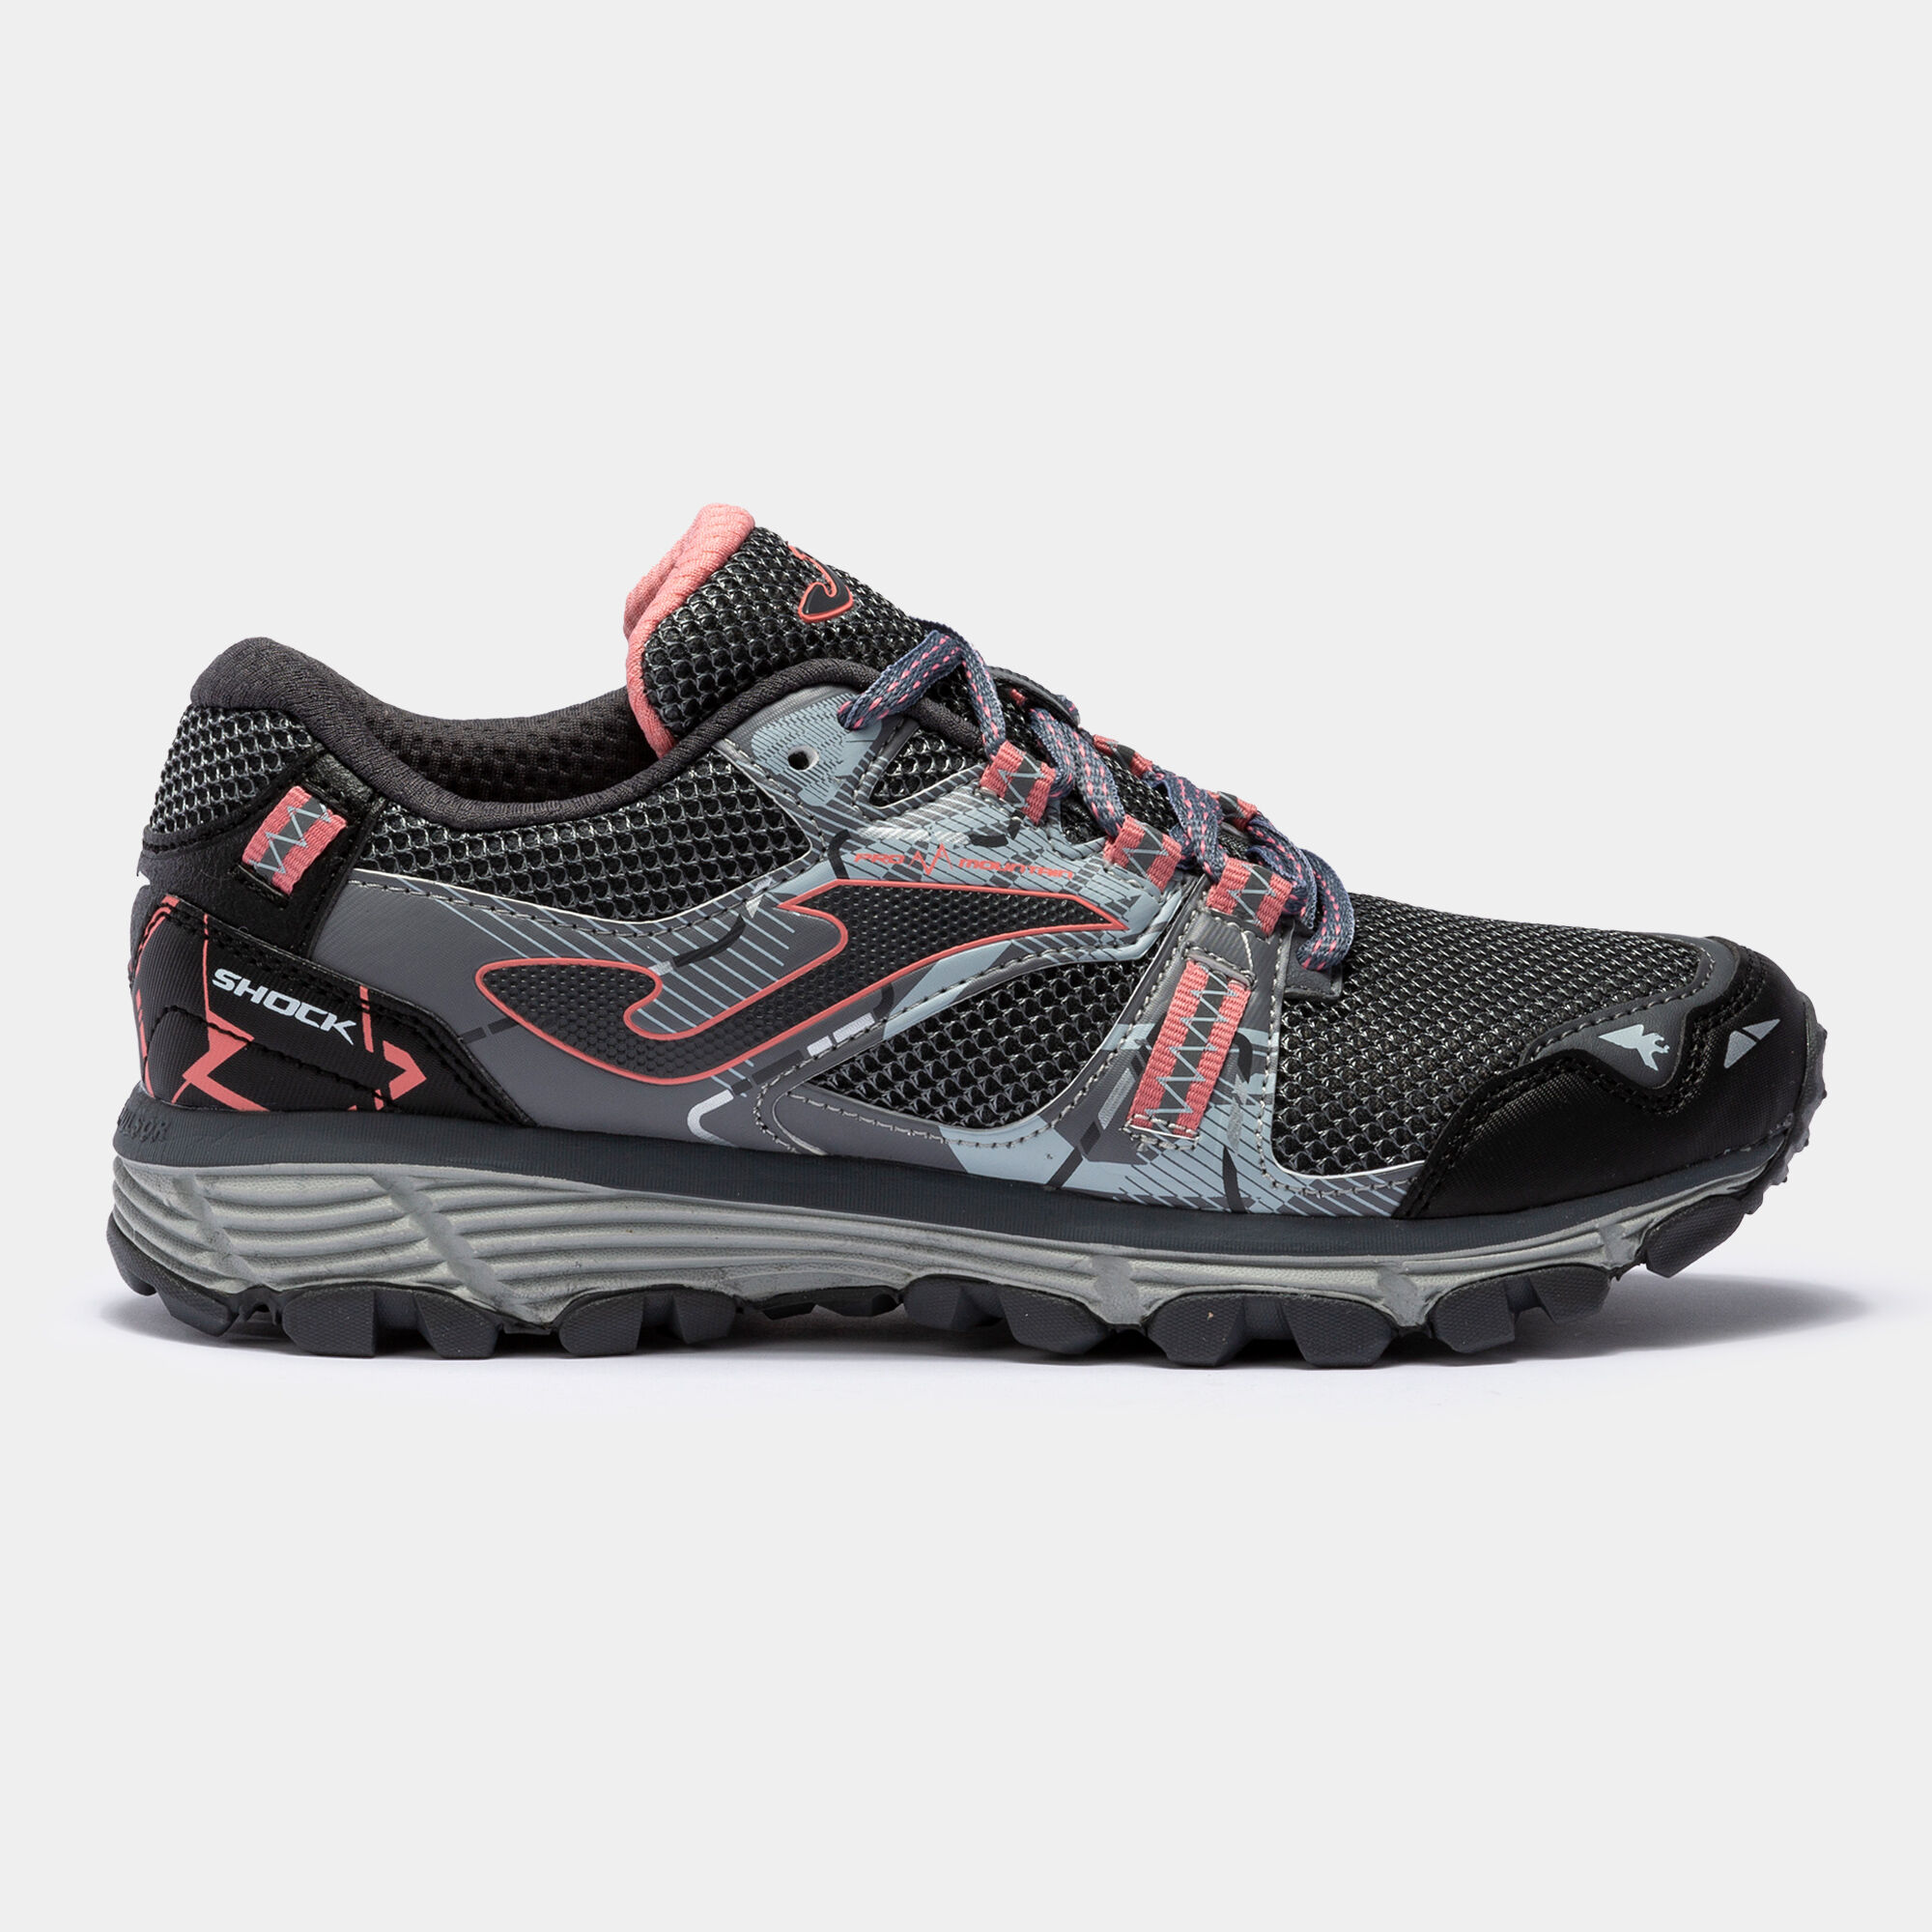 CHAUSSURES TRAIL RUNNING SHOCK 22 FEMME GRIS ROSE